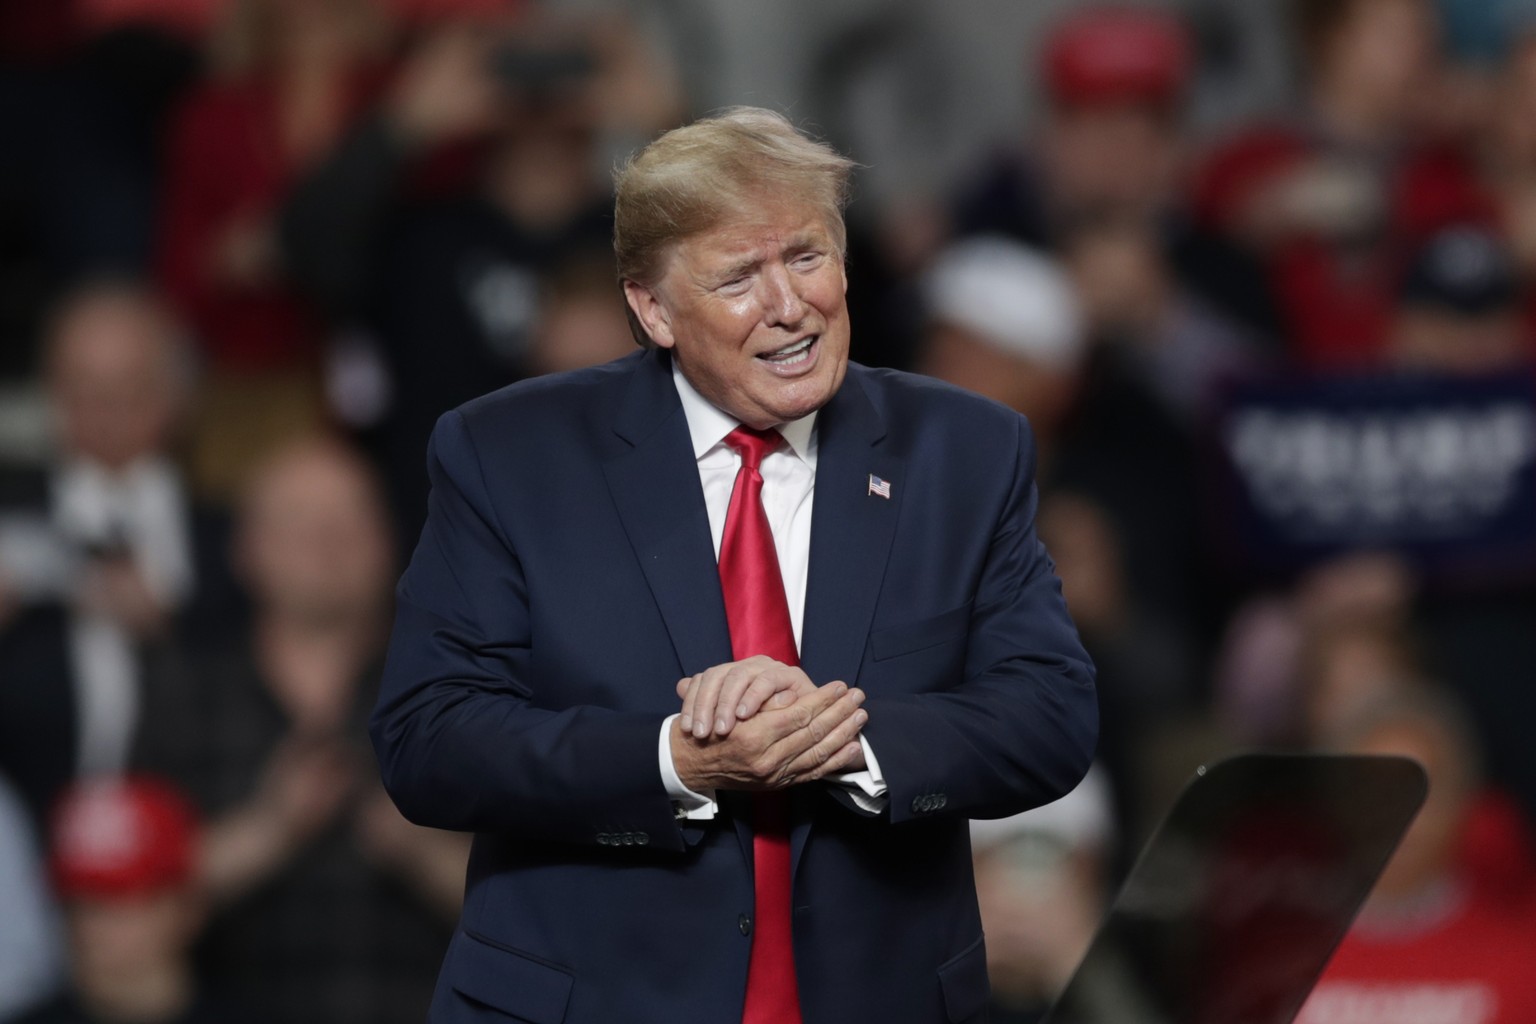 President Donald Trump reacts after speaking during a campaign rally at the Huntington Center, Thursday, Jan. 9, 2020, in Toledo, Ohio. (AP Photo/Tony Dejak)
Donald Trump